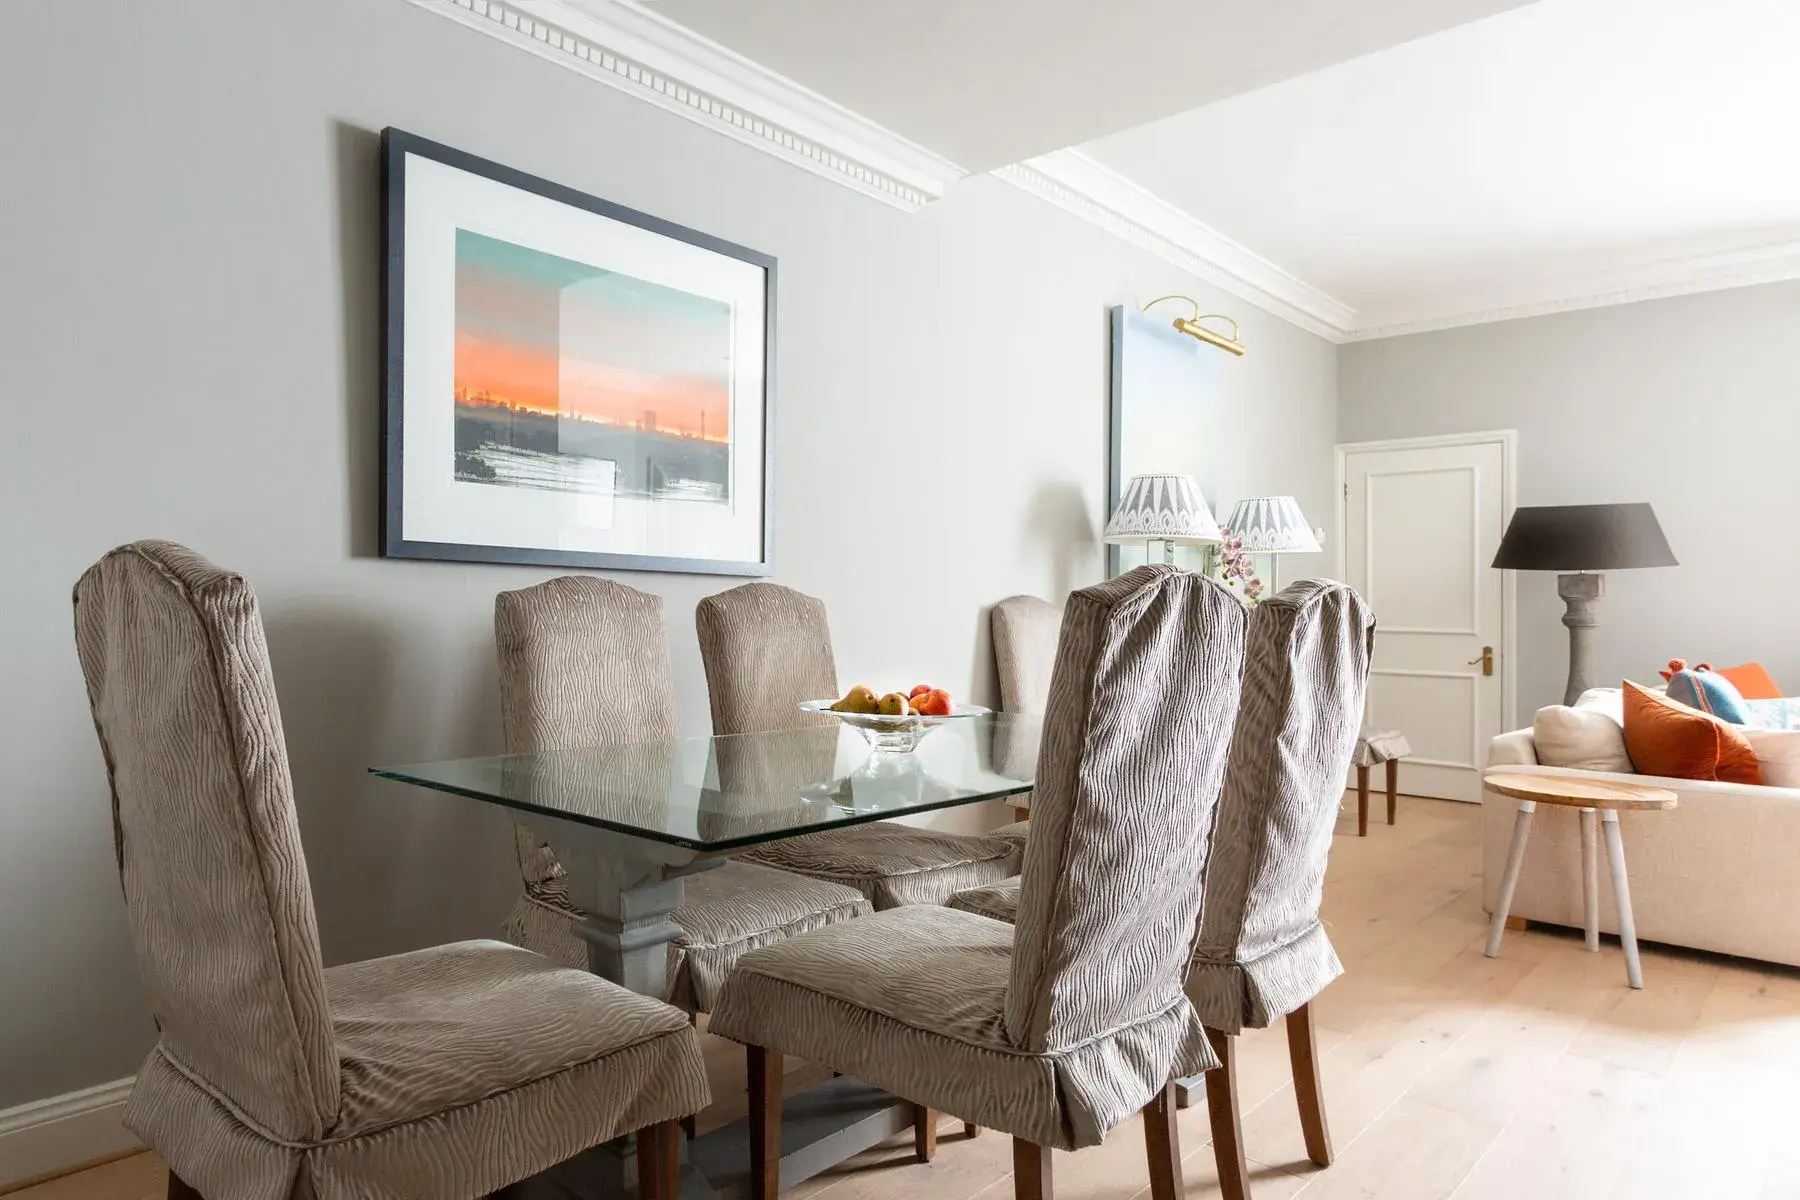 Claverton street, holiday home in Pimlico, London